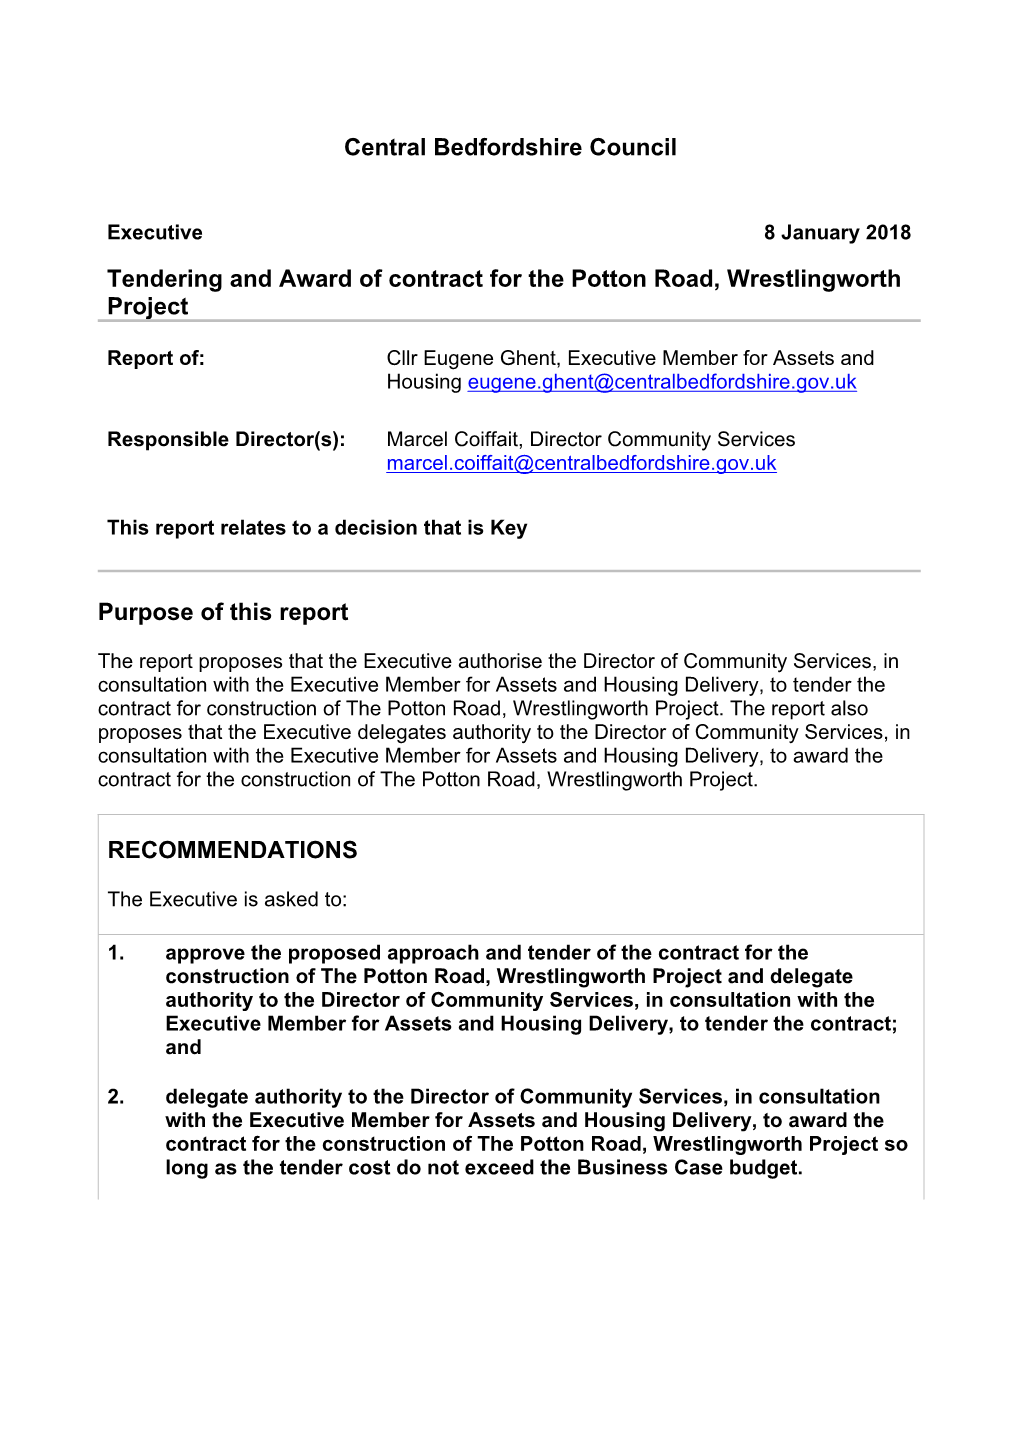 Tendering and Award of Contract for the Potton Road, Wrestlingworth Project